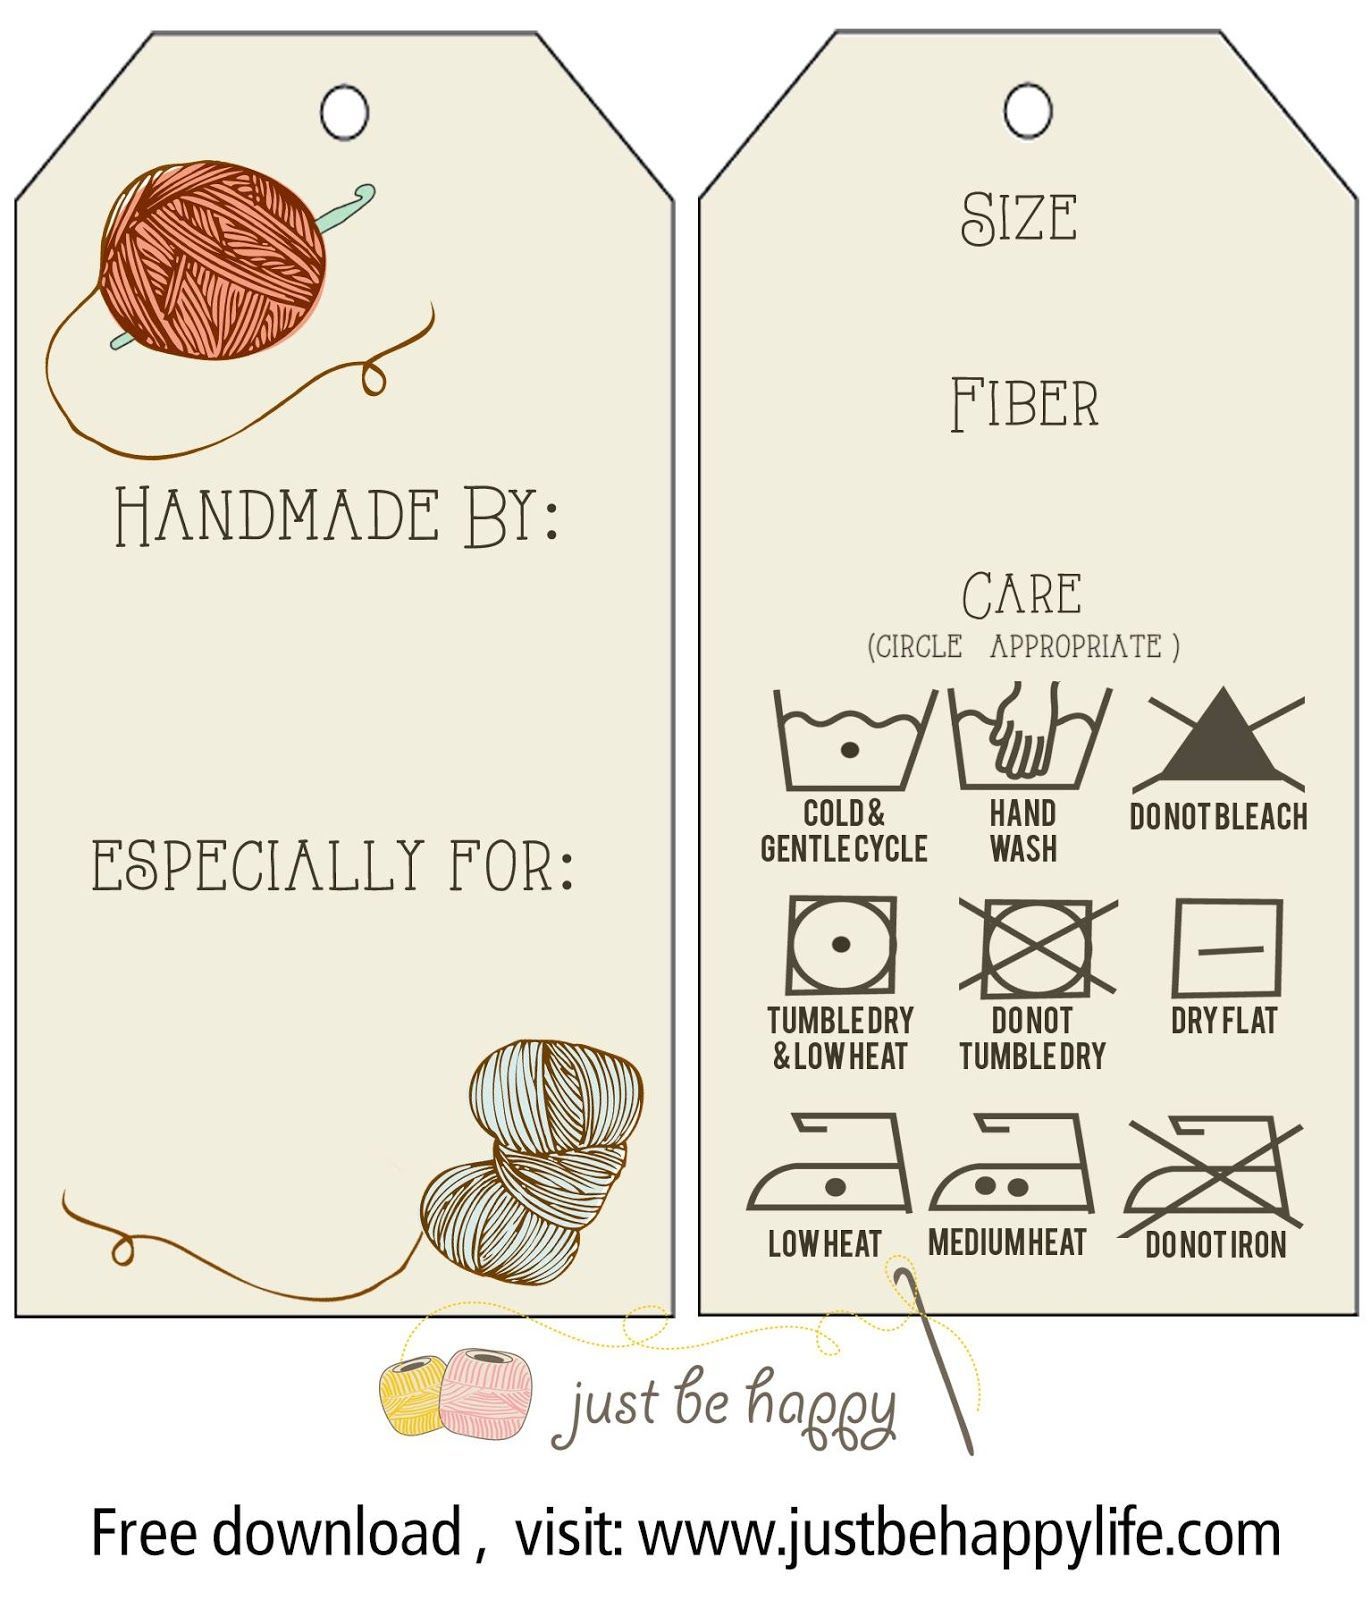 Just be happy!: Gift Tags {Free Printables}